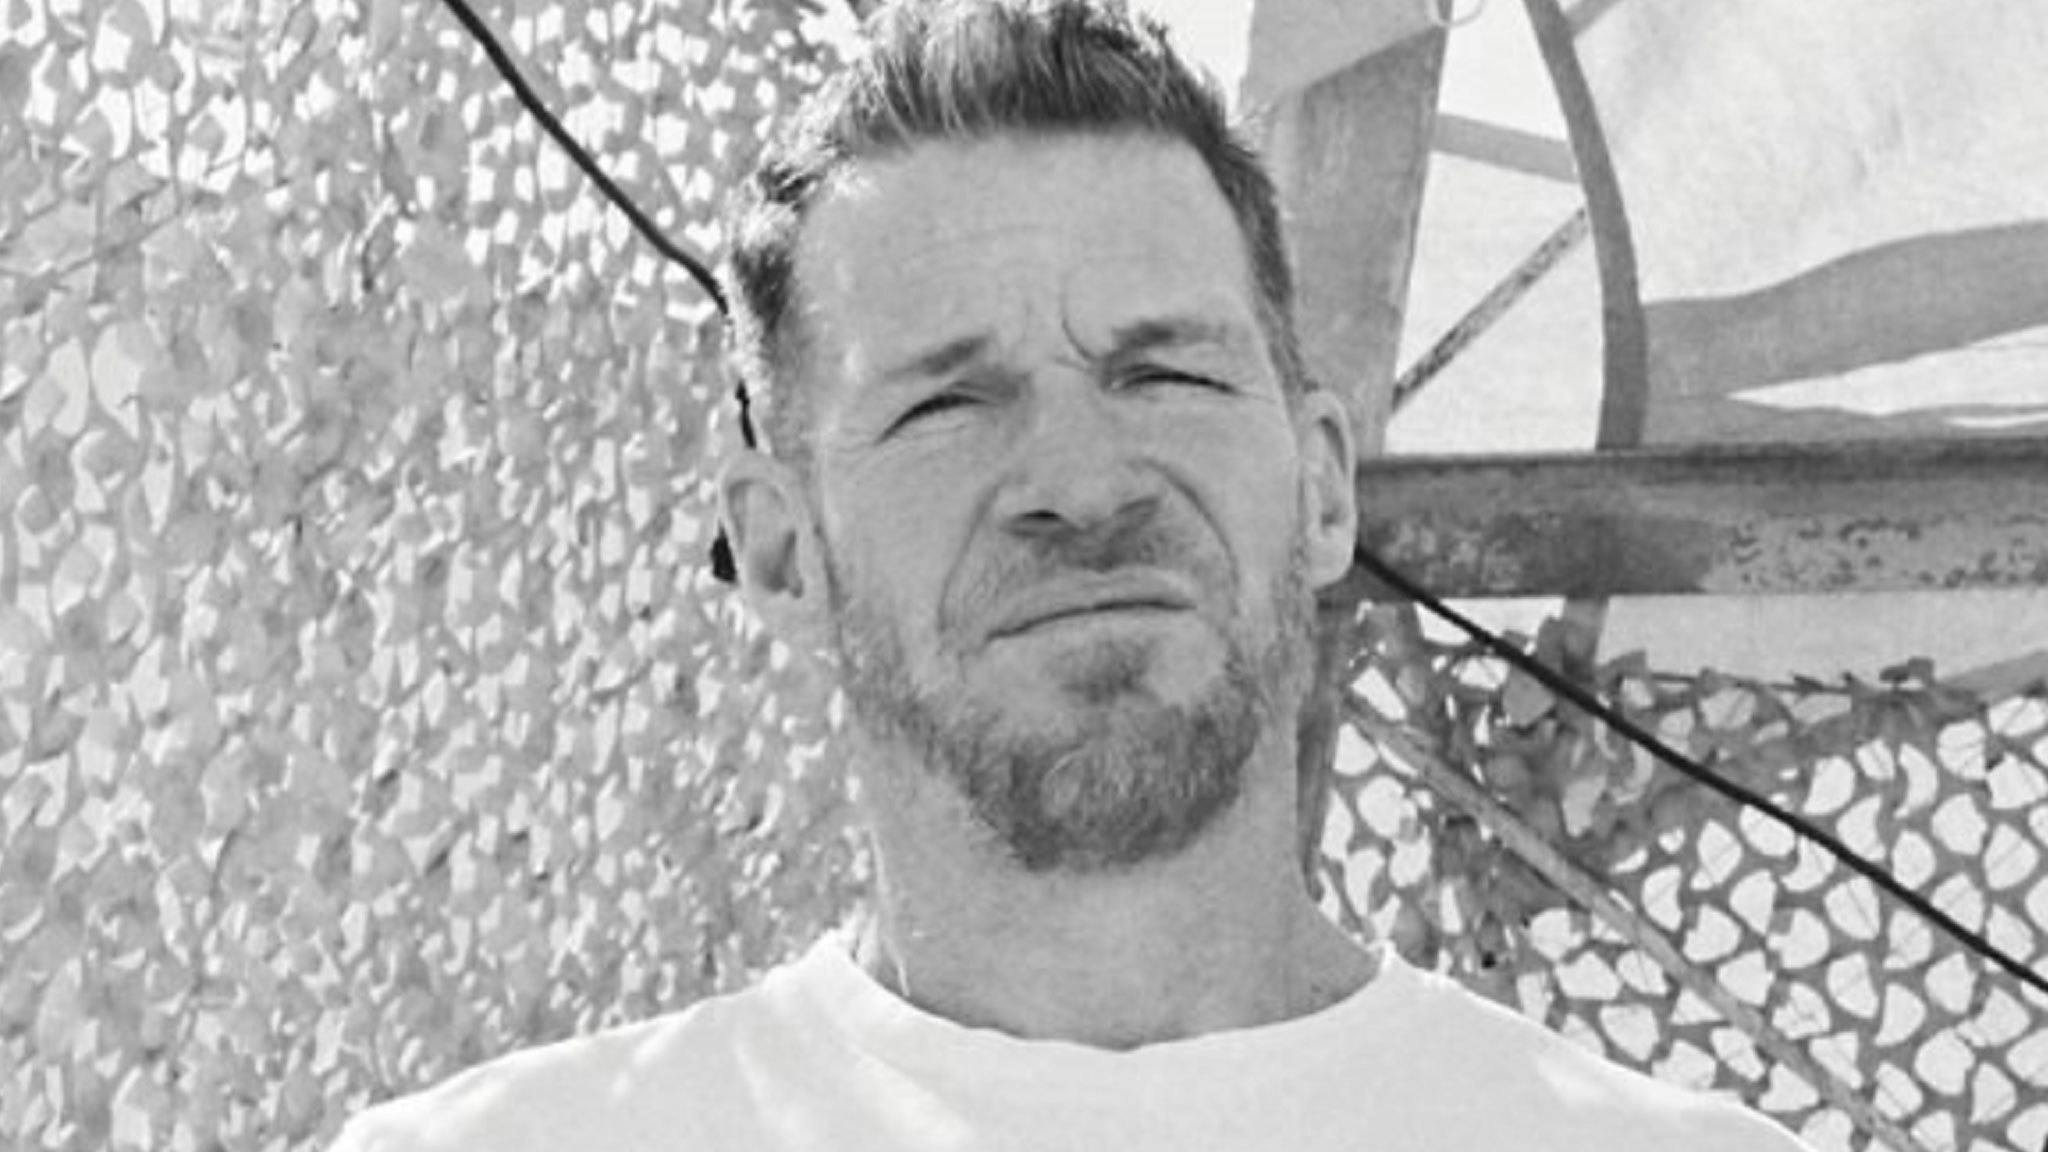 Tim Commerford has prostate cancer: “I kept it to myself throughout the touring we did and it was brutal”